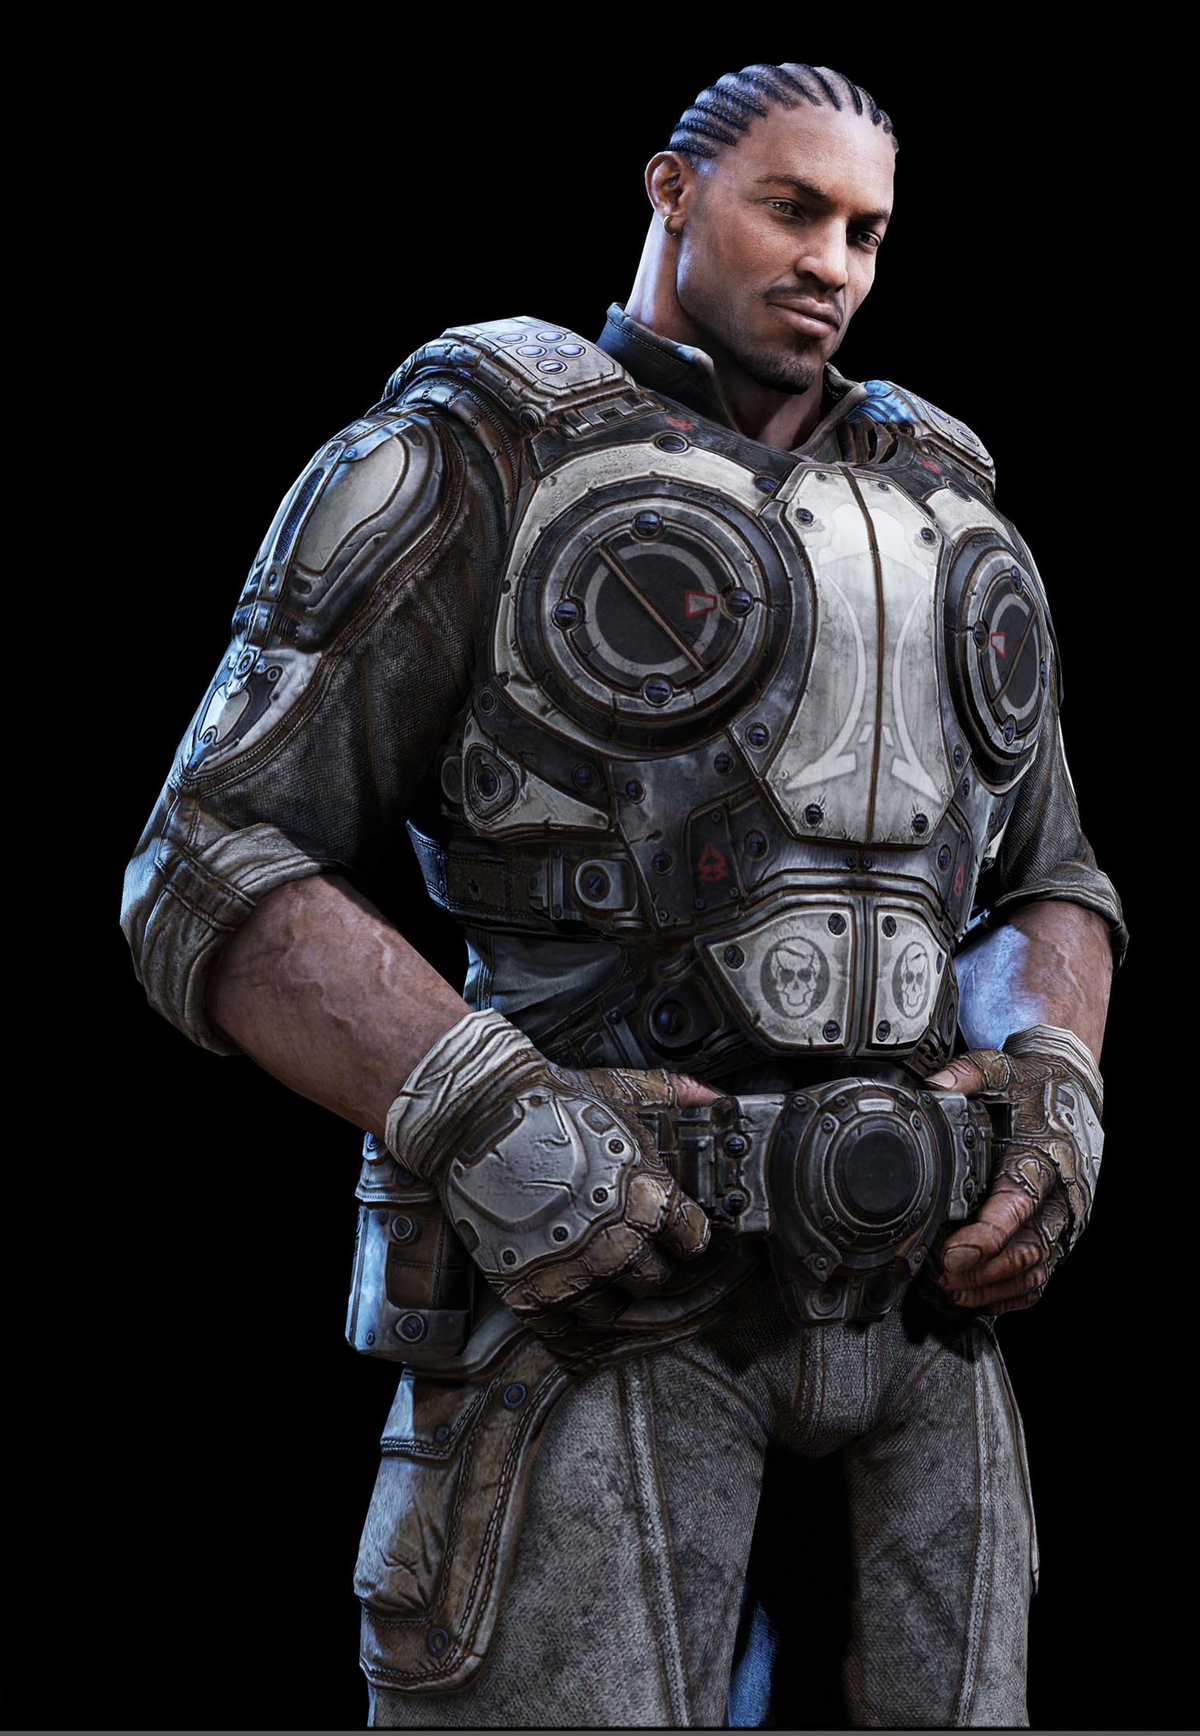 Sure looks like the next Gears of War is ramping up production